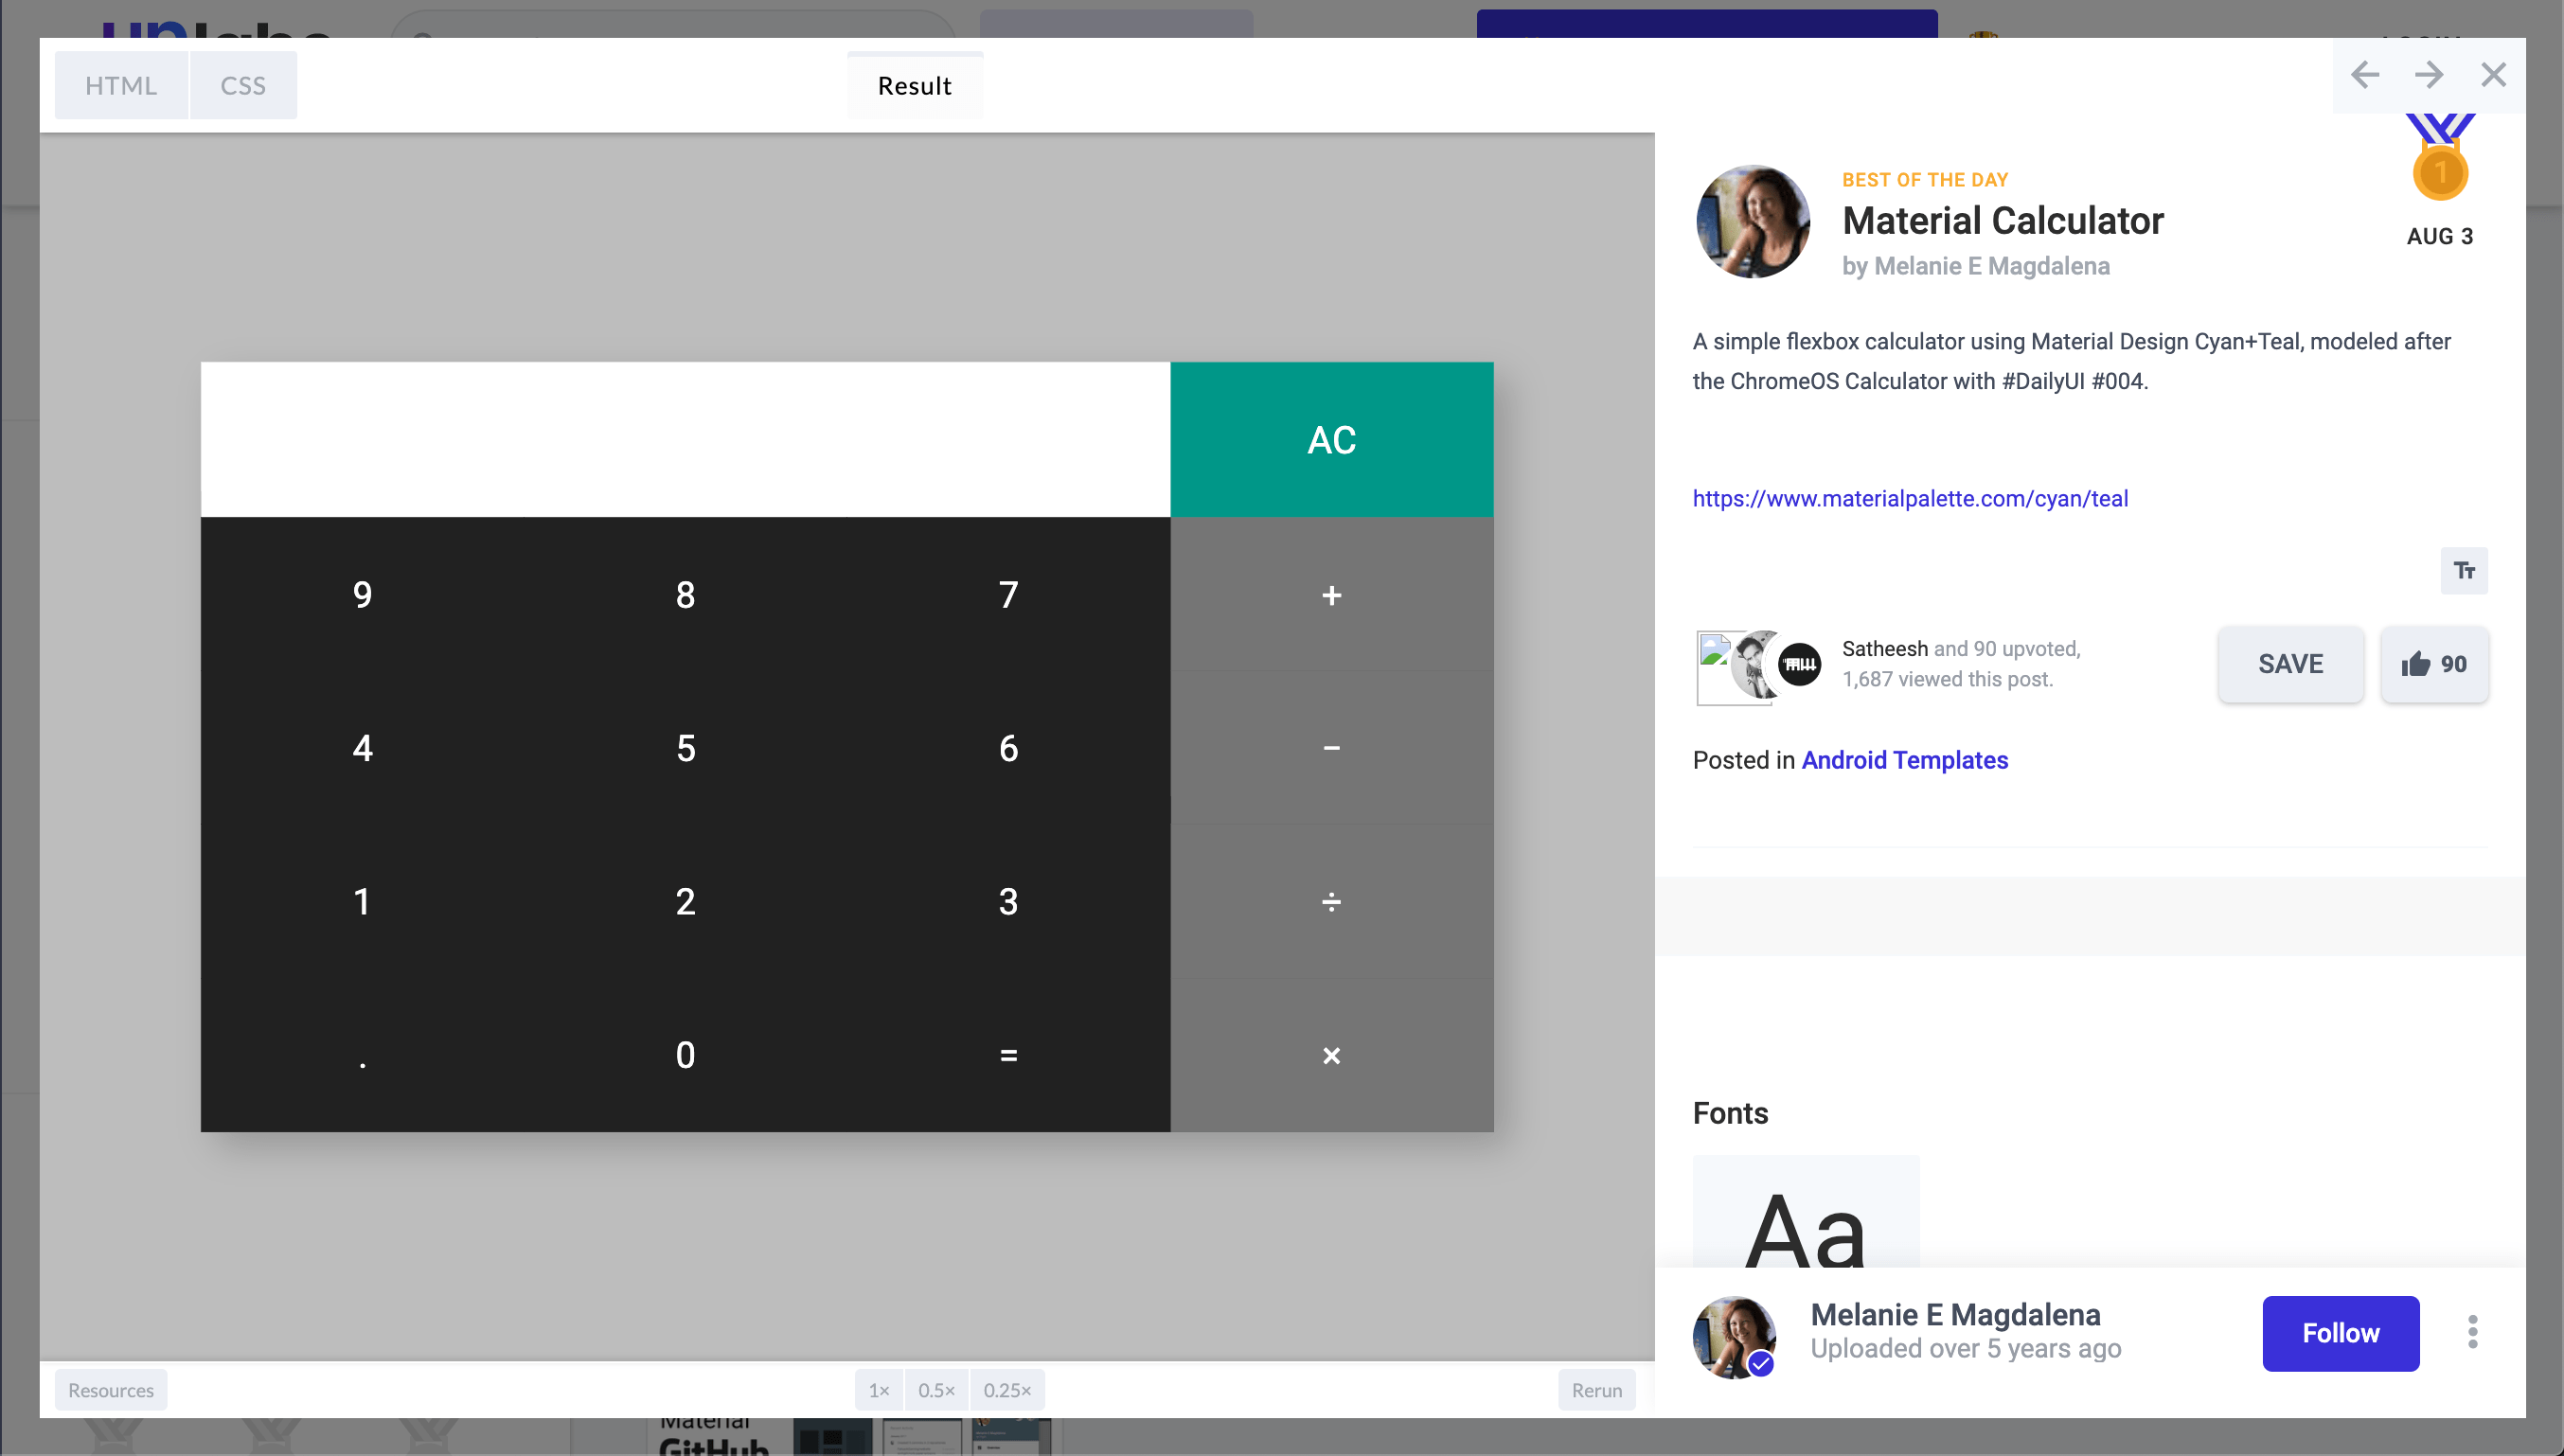 Screenshot of my calculator submission on UpLabs with its 